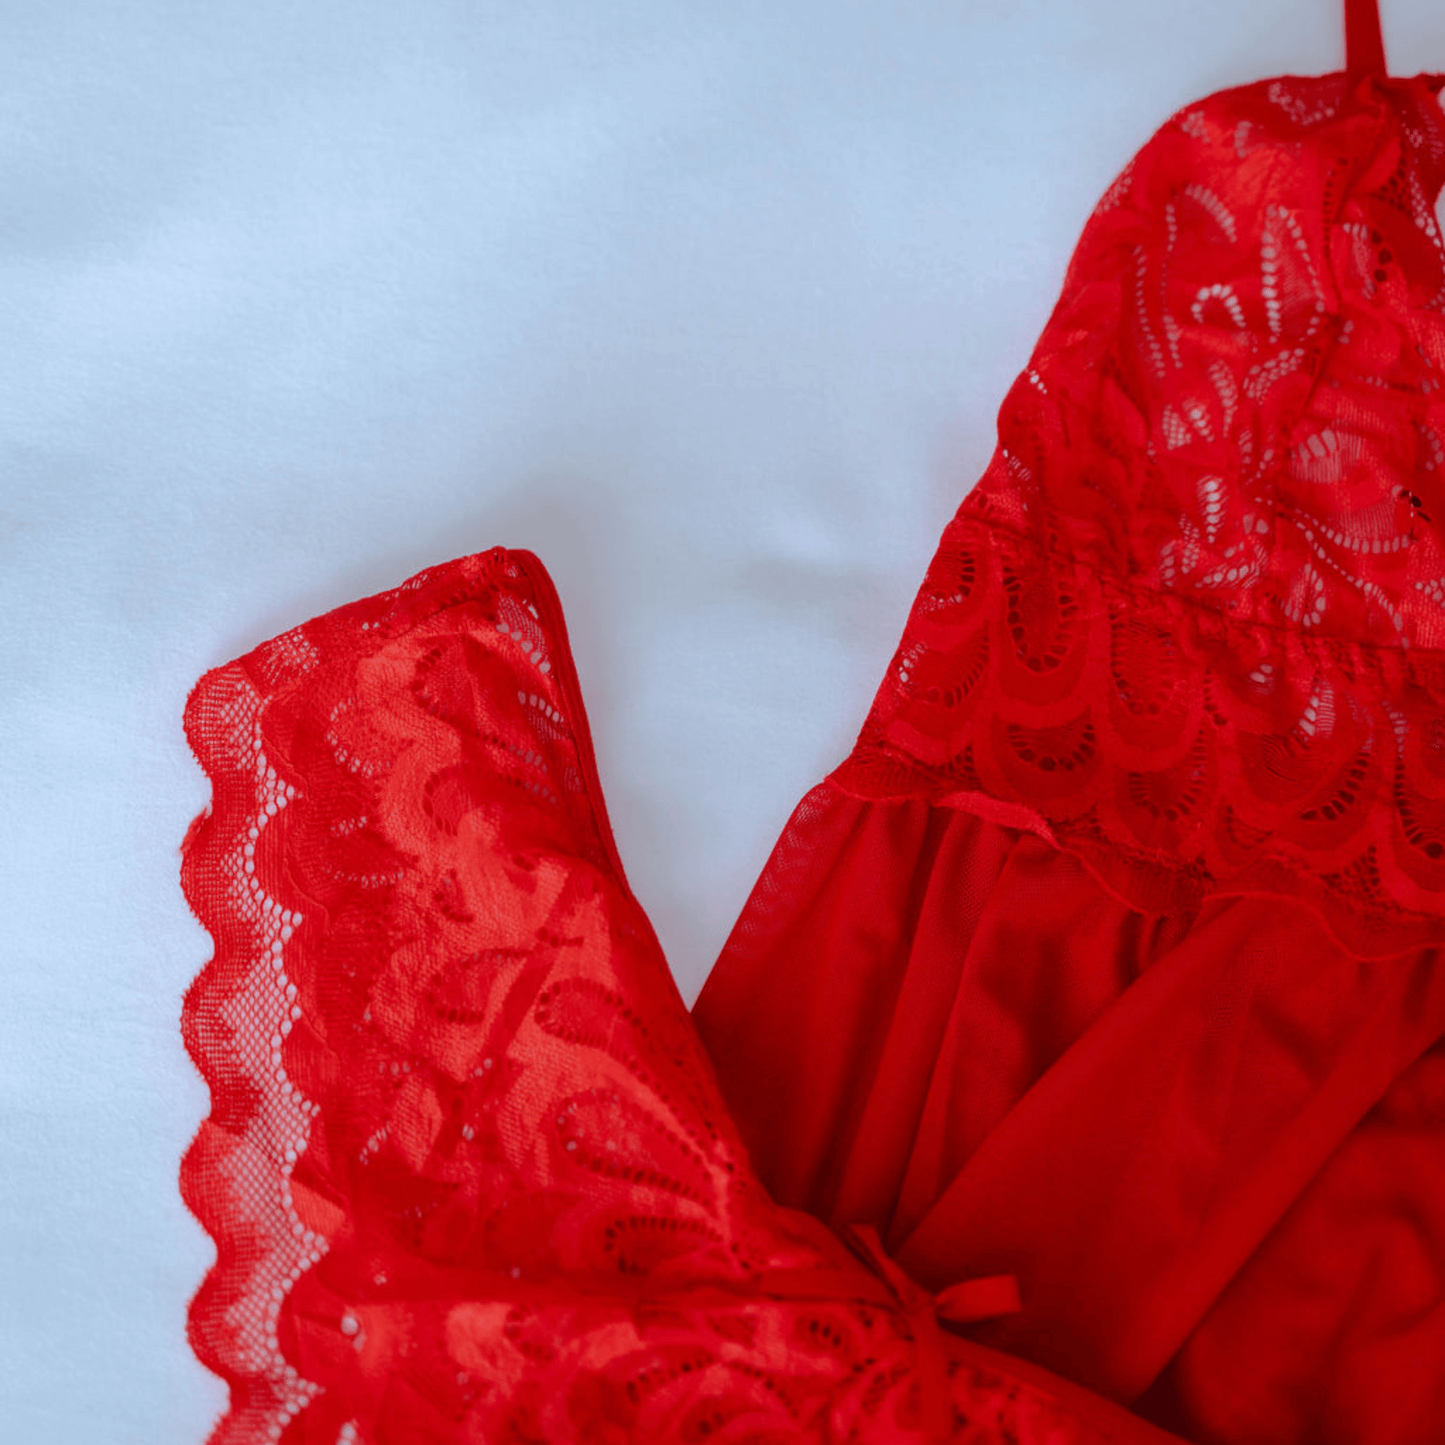 The Complete DIY Boudoir Experience